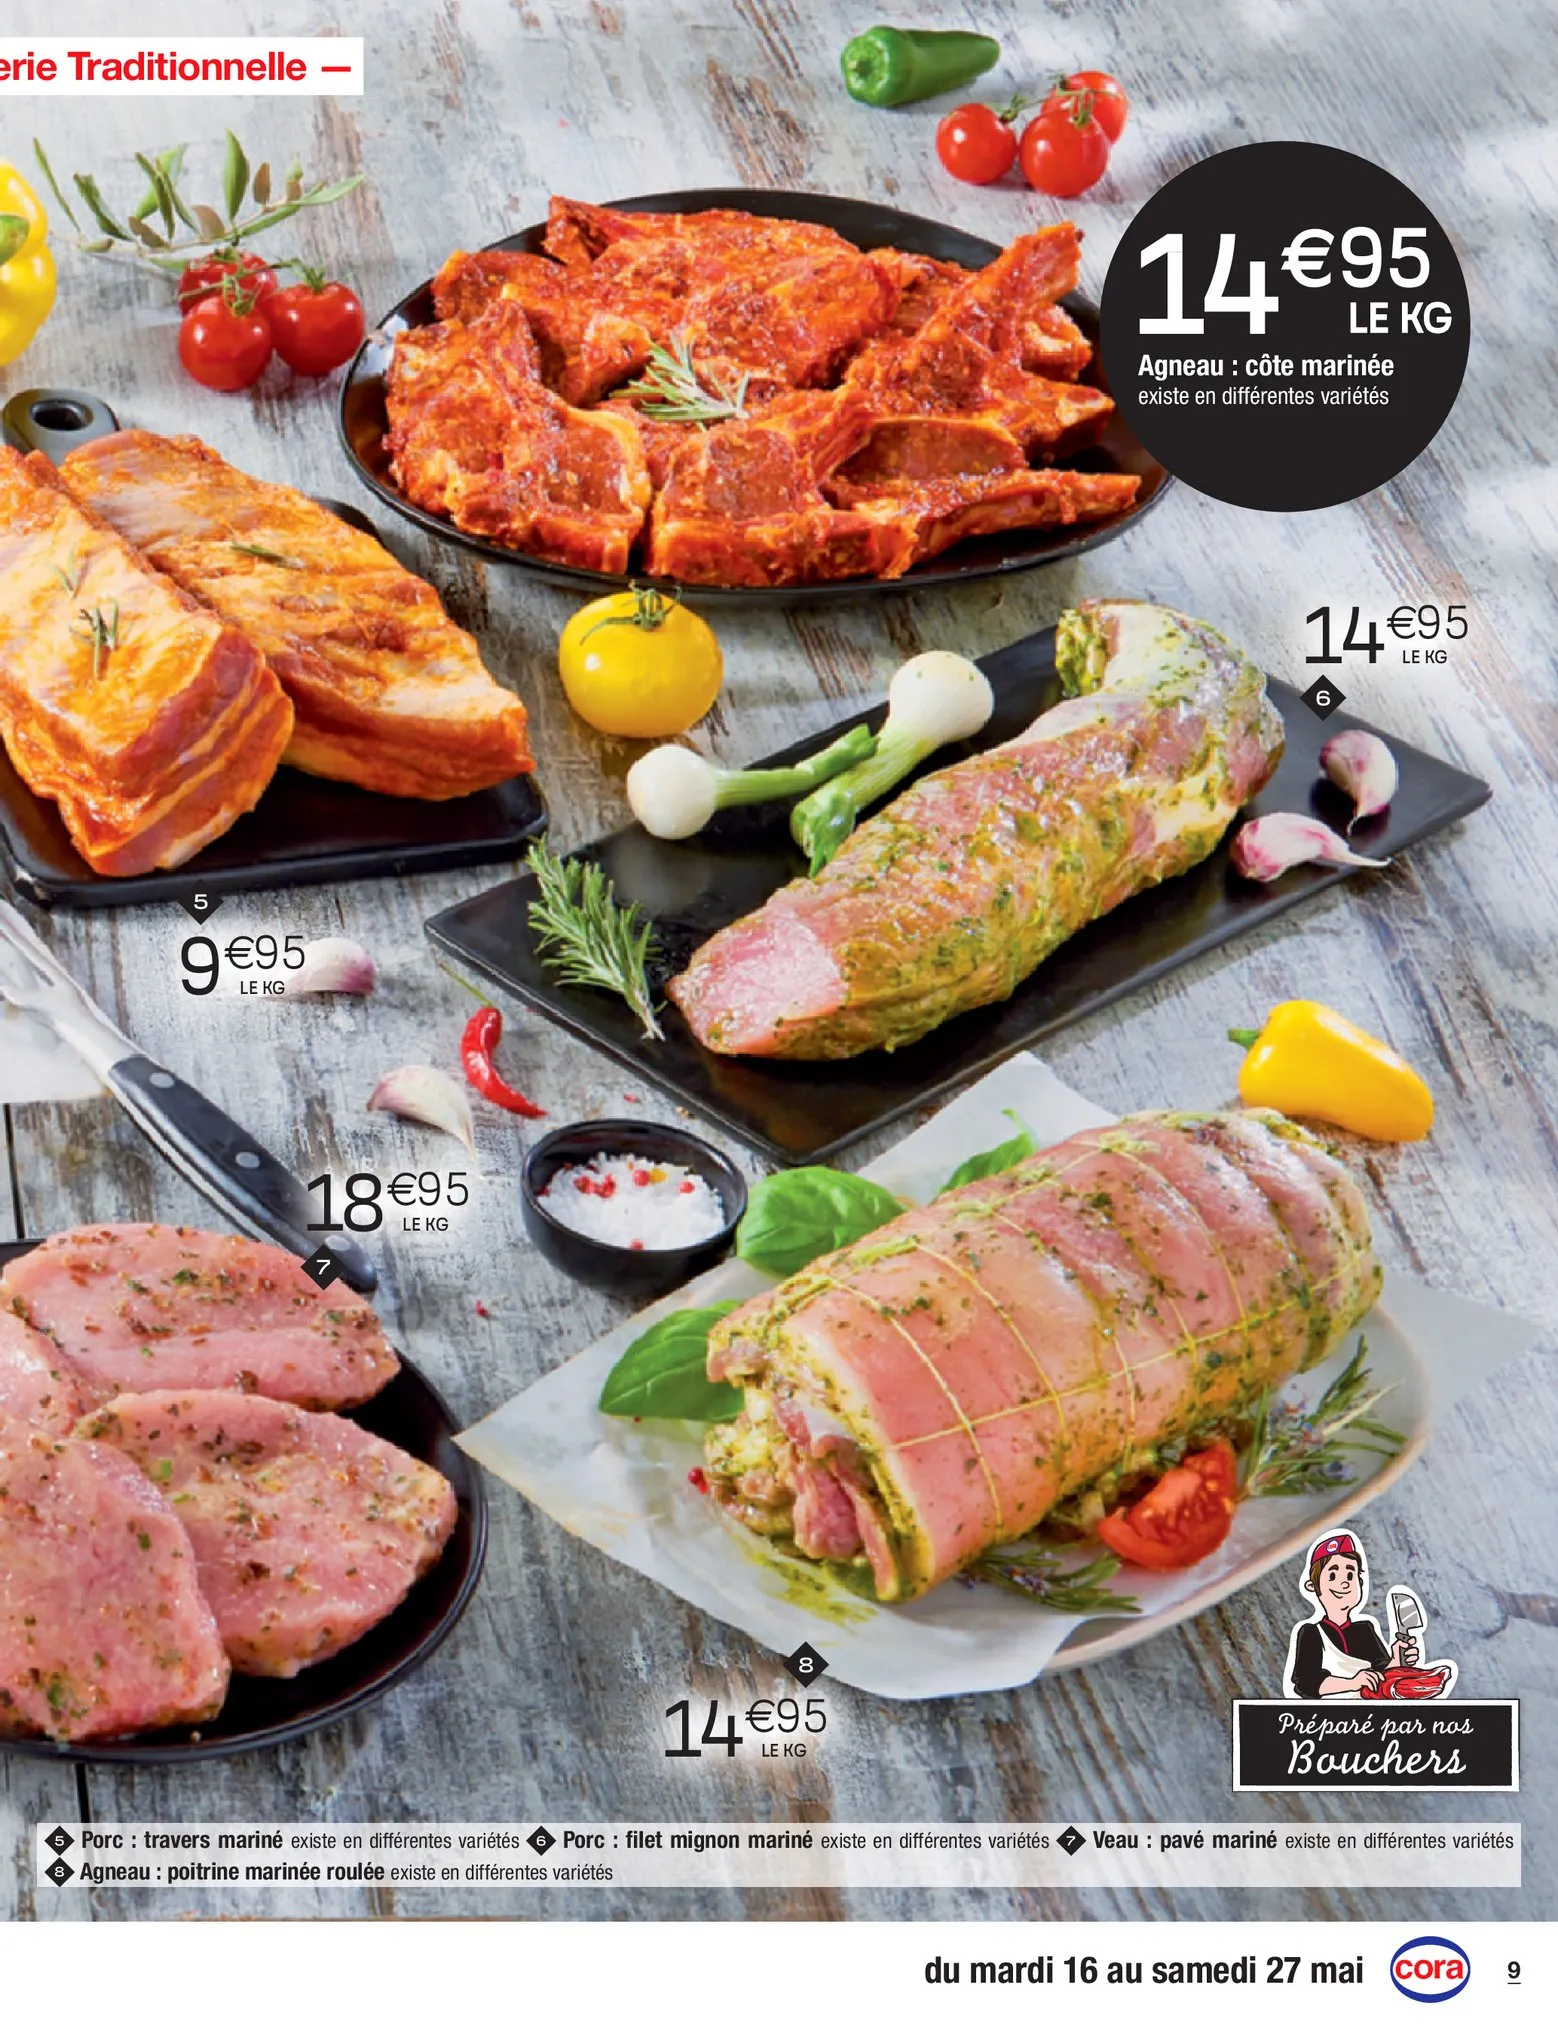 Catalogue Spécial Barbecue, page 00009